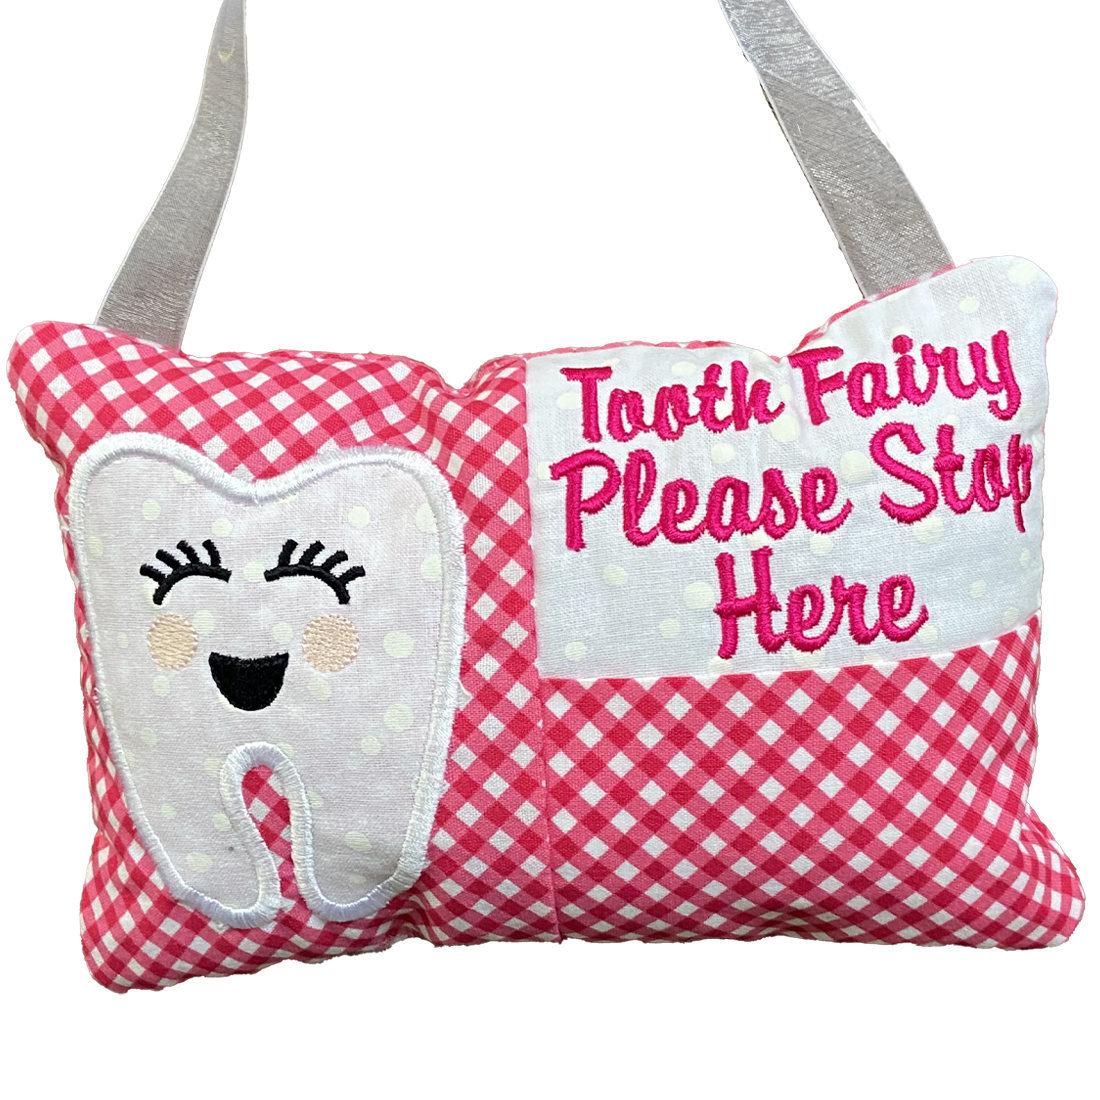 Child's Tooth Fairy Hanging Pillow Cushion Pink Gingham